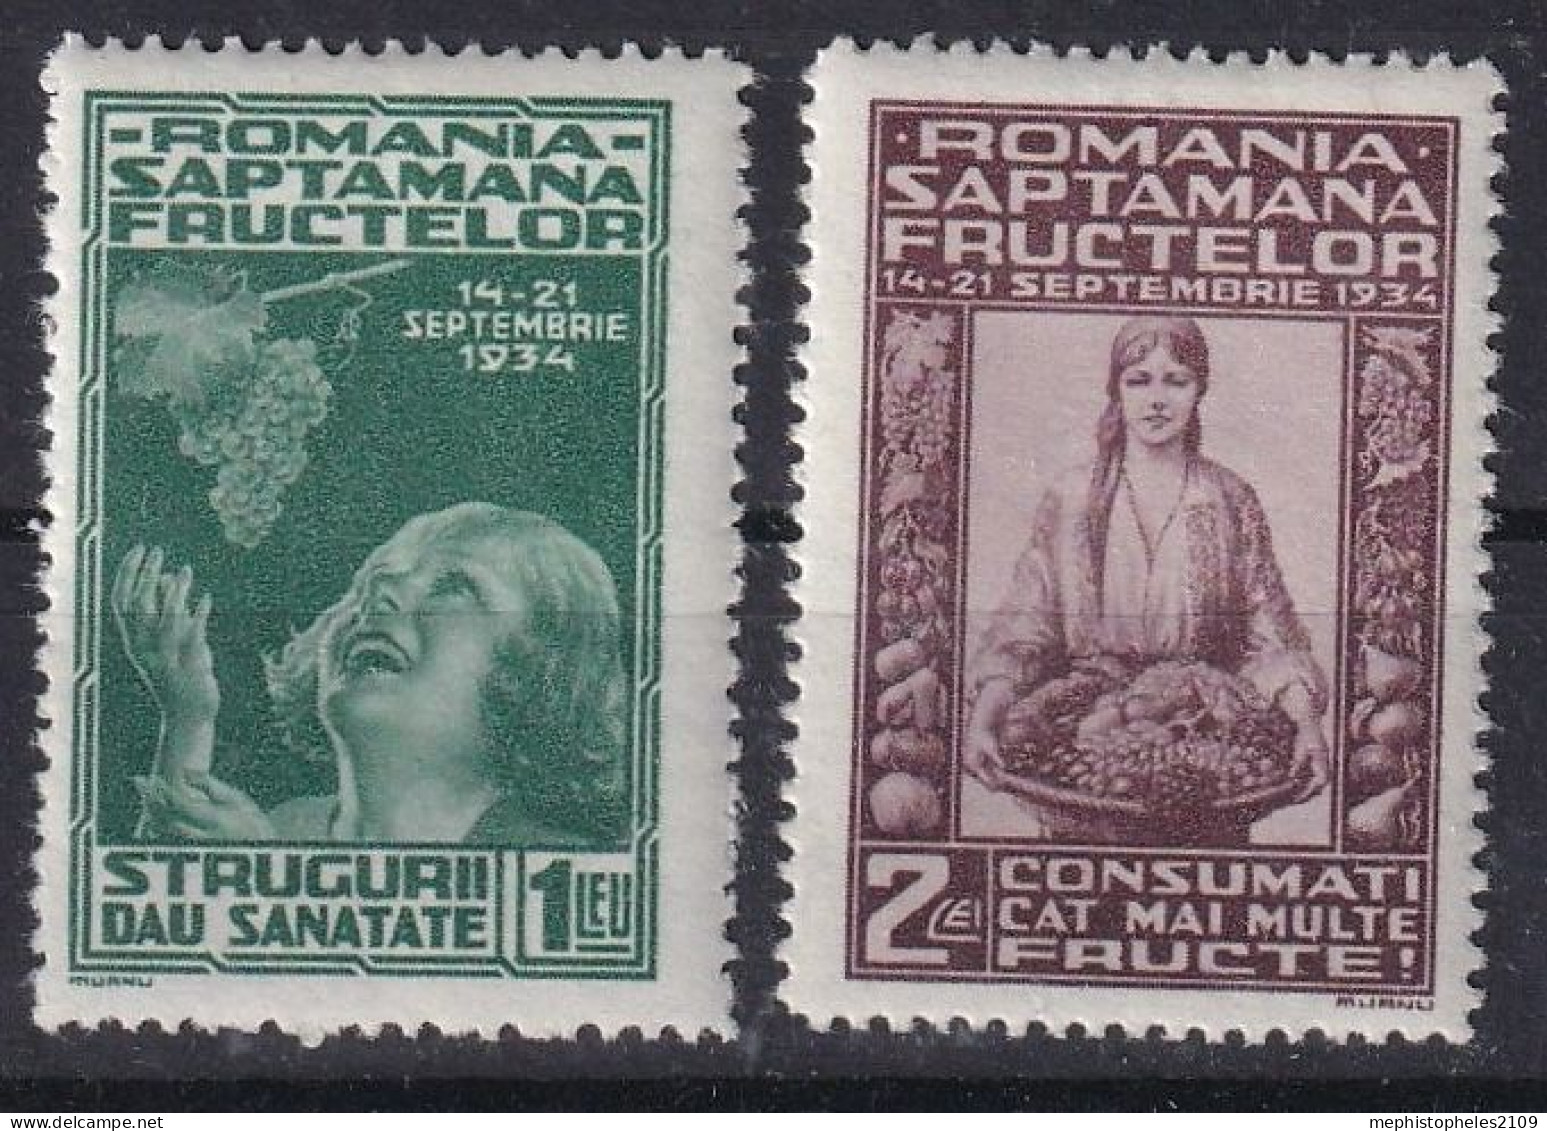 ROMANIA 1934 - Canceled - Sc# 440, 441 - Used Stamps